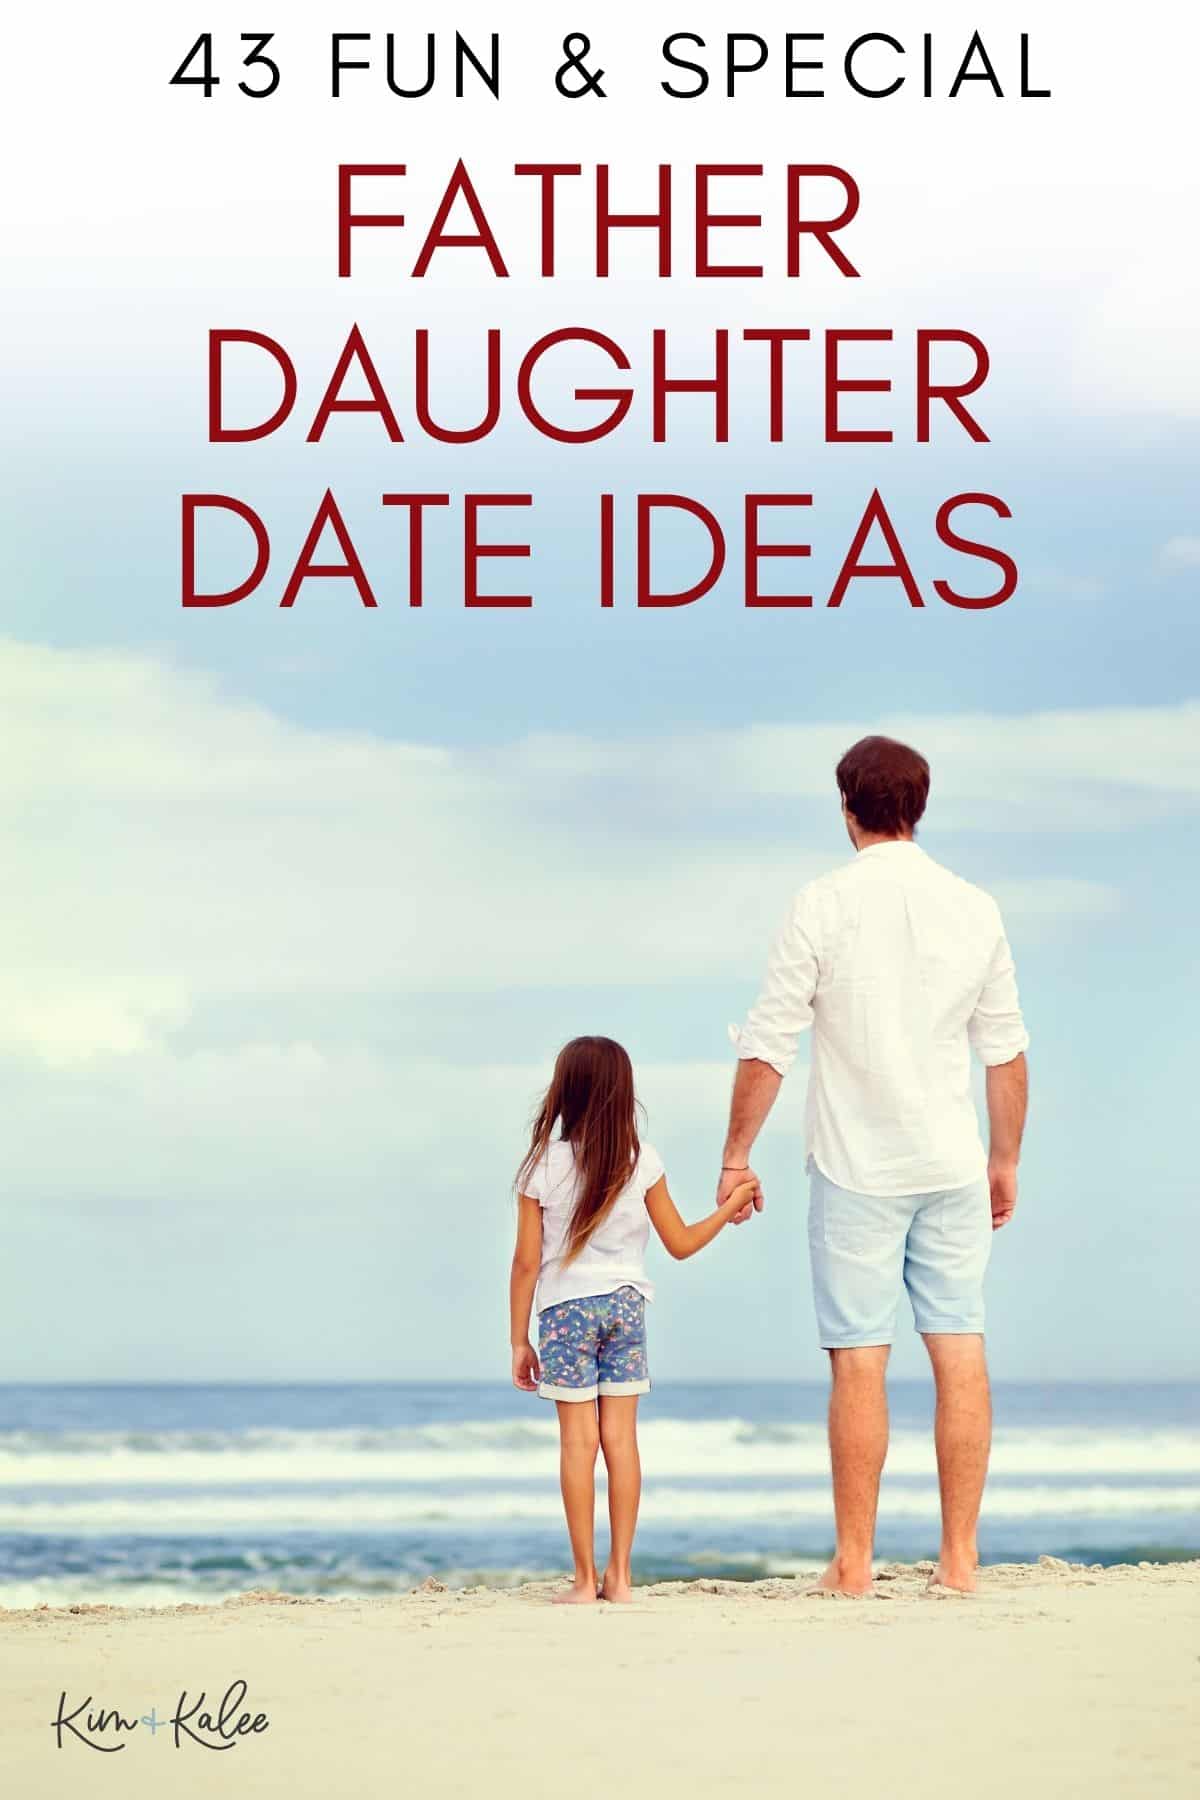 43 fun and special father daughter date ideas